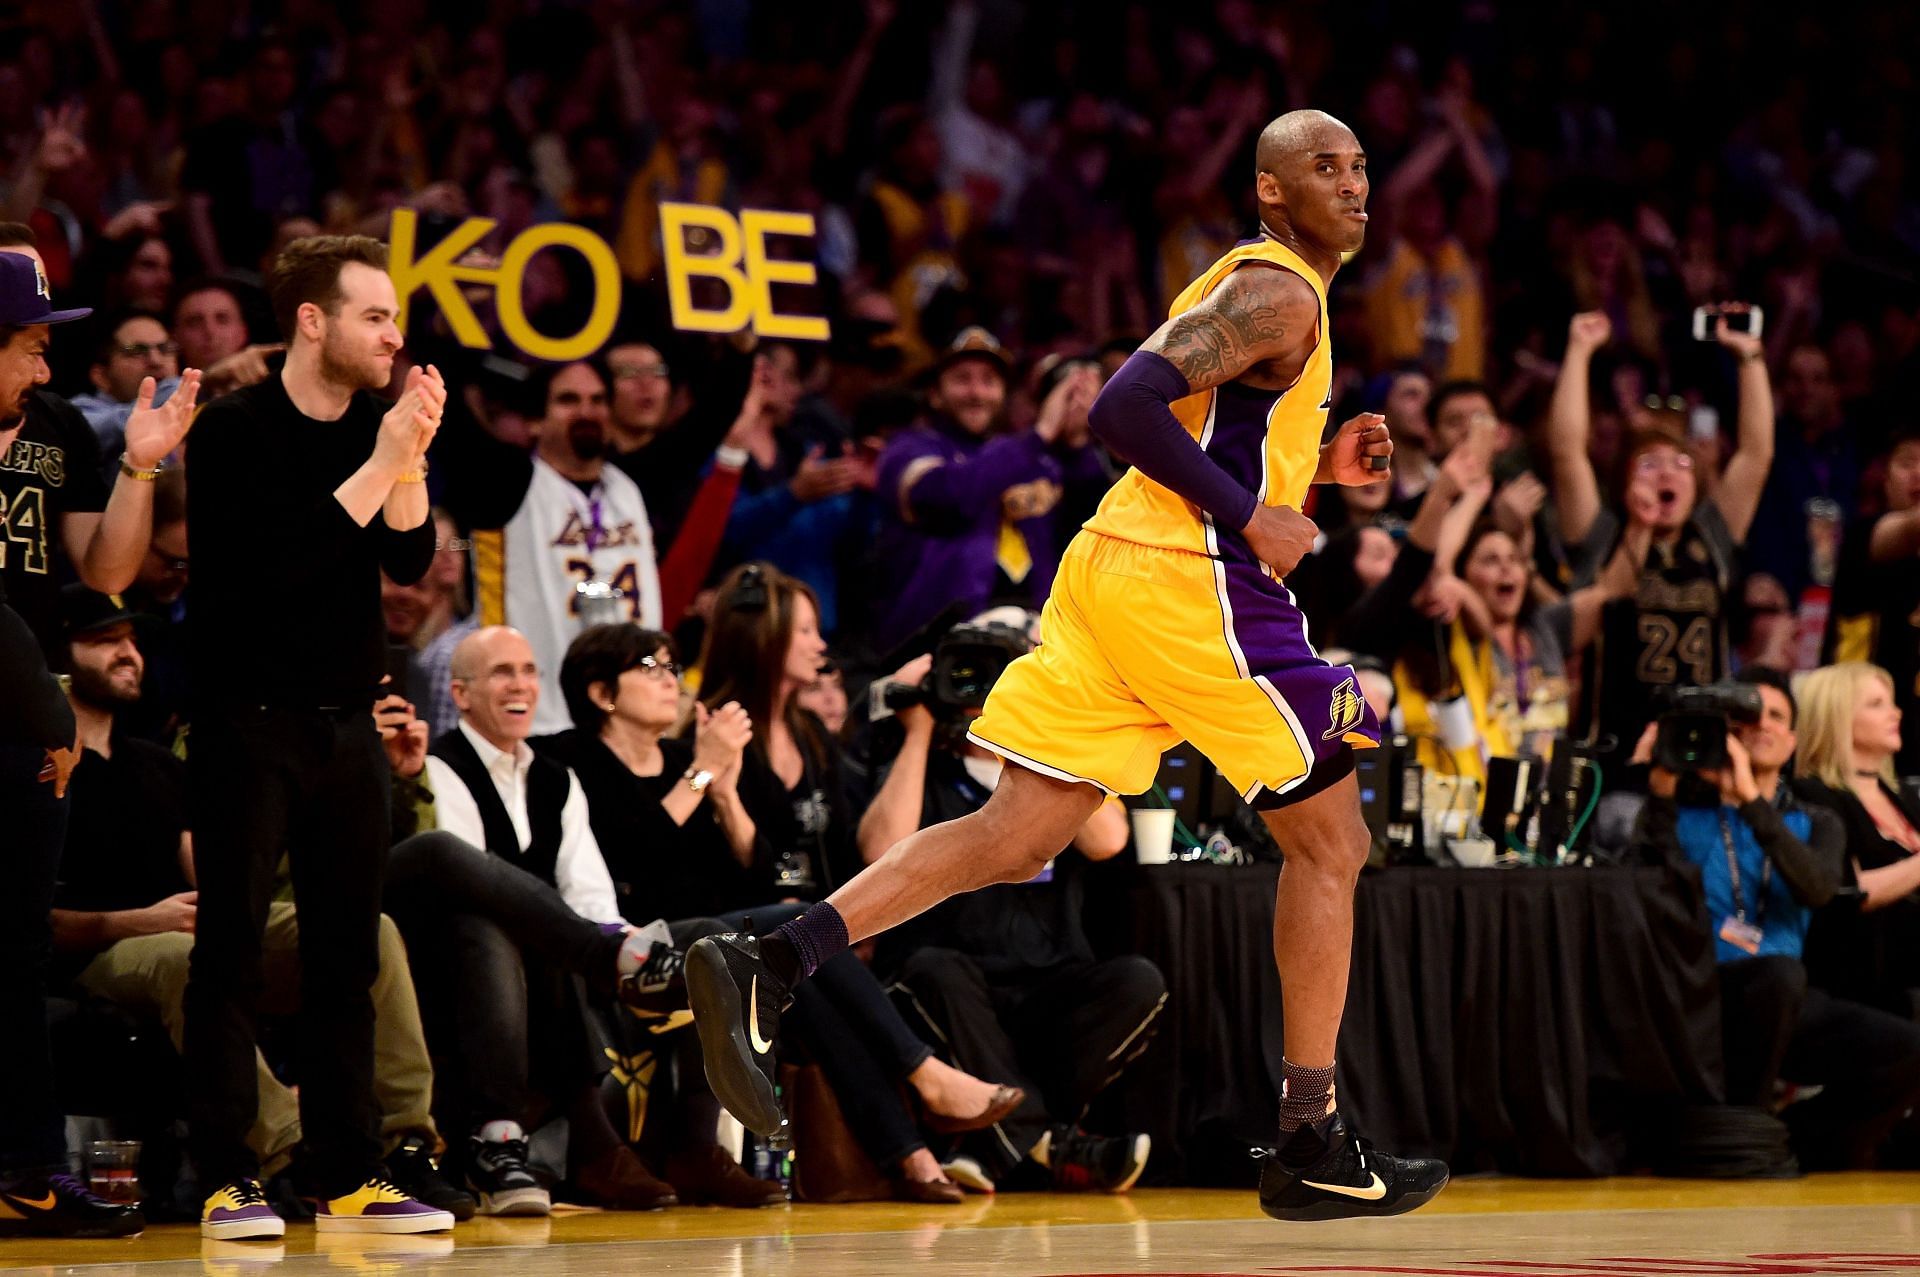 Kobe Bryant believed he should have at least scored 90 against the Toronto Raptors.